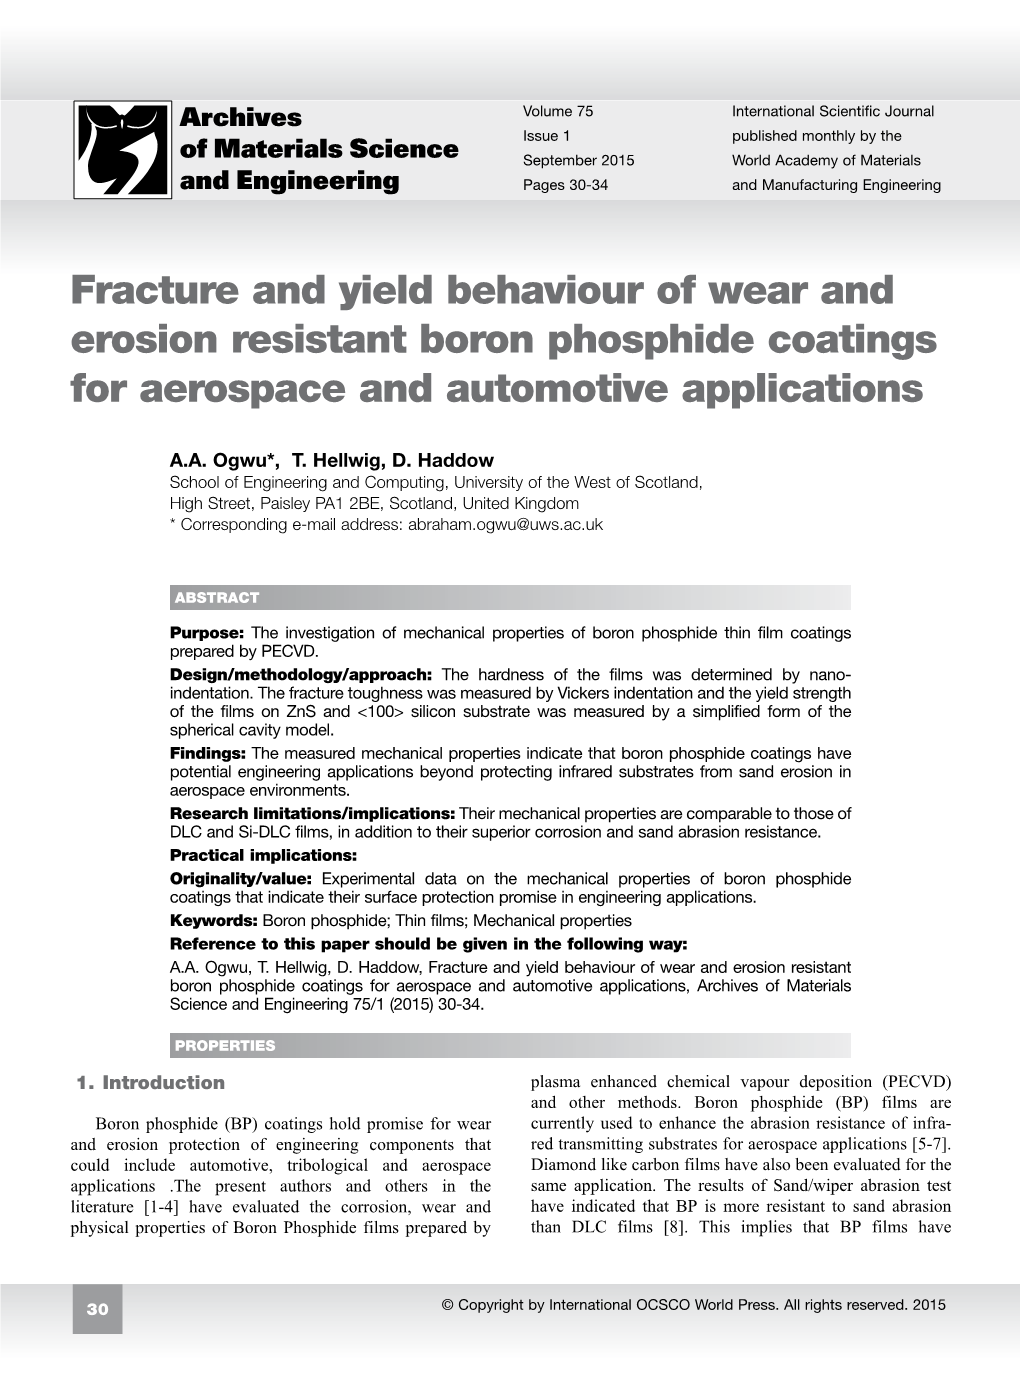 Fracture and Yield Behaviour of Wear and Erosion Resistant Boron Phosphide Coatings for Aerospace and Automotive Applications